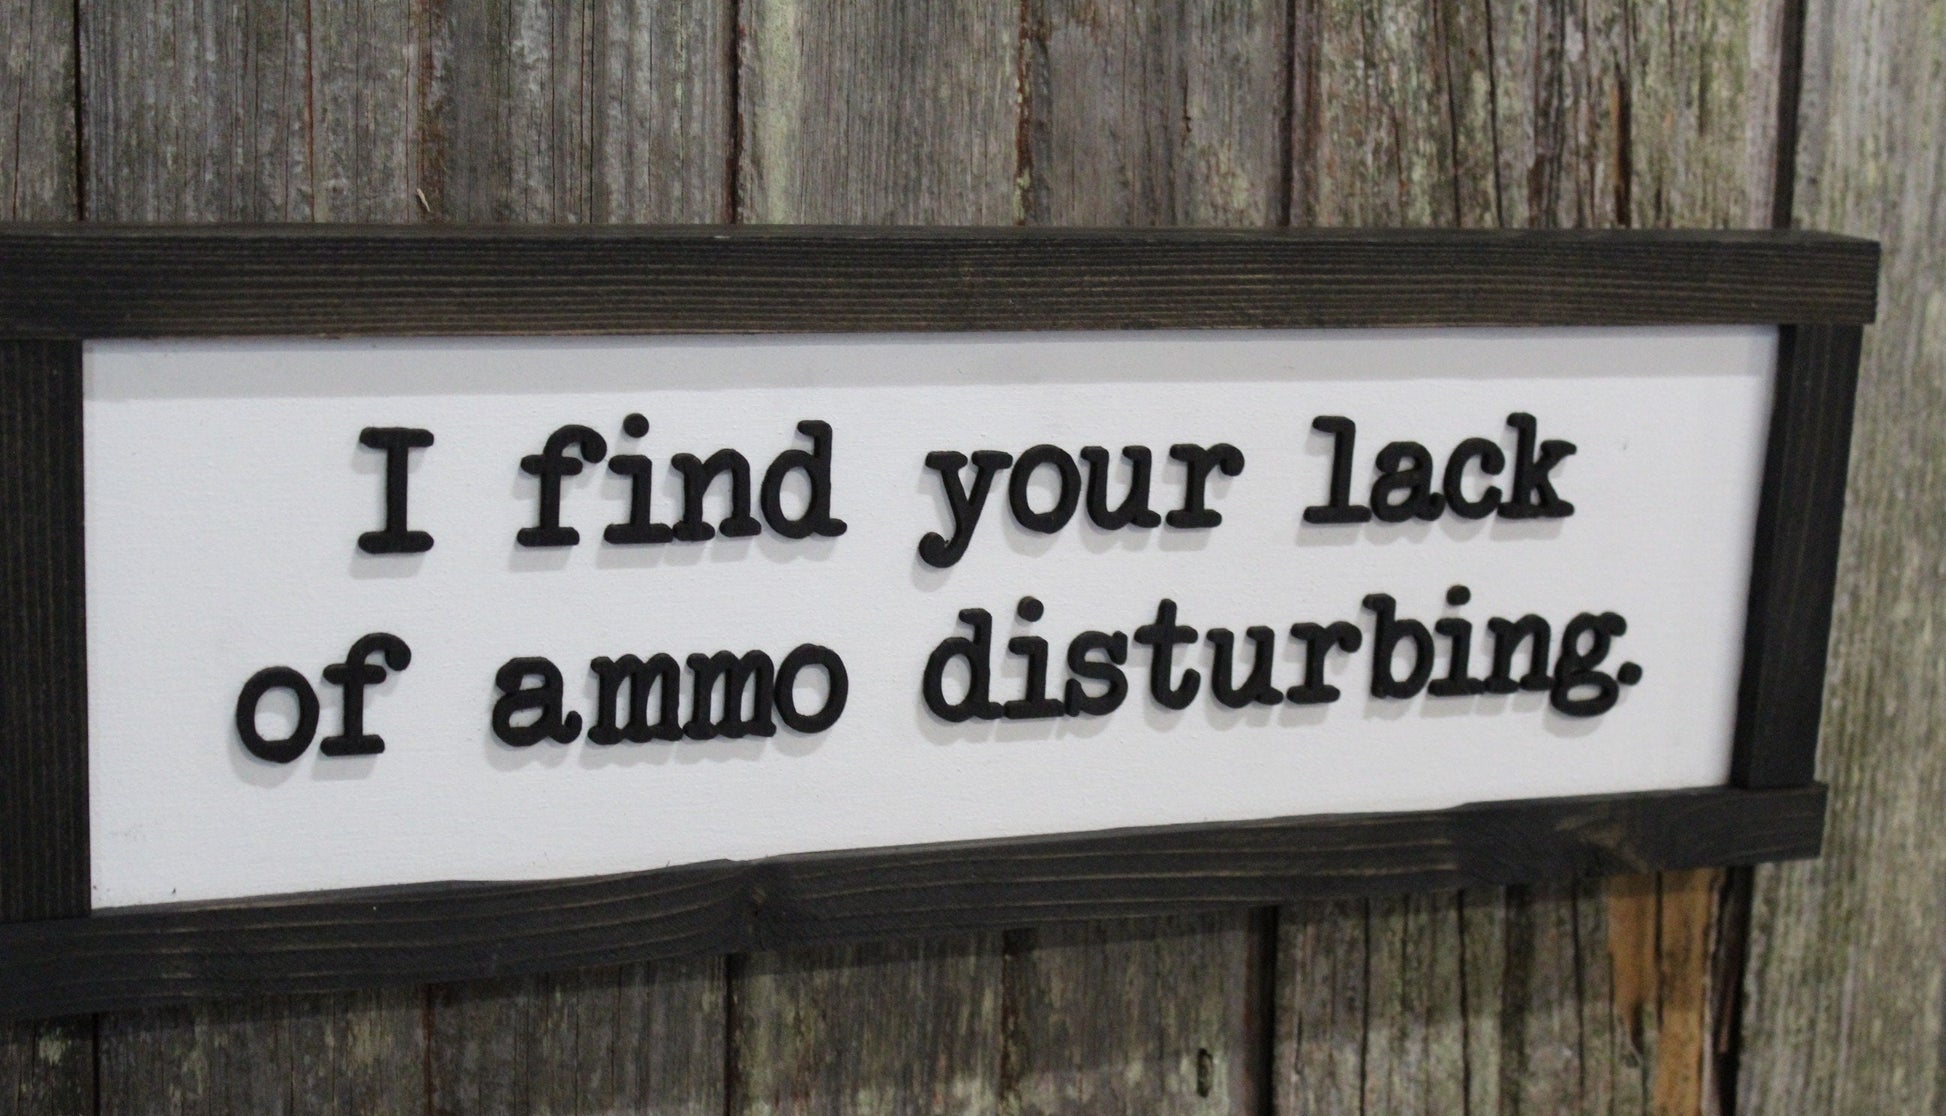 Fathers Day Gift I Find Your Lack Of Ammo Disturbing Dad Joke Gun Silly 3D Raised Text Farmhouse Handmade Rustic Primitive Ammunition